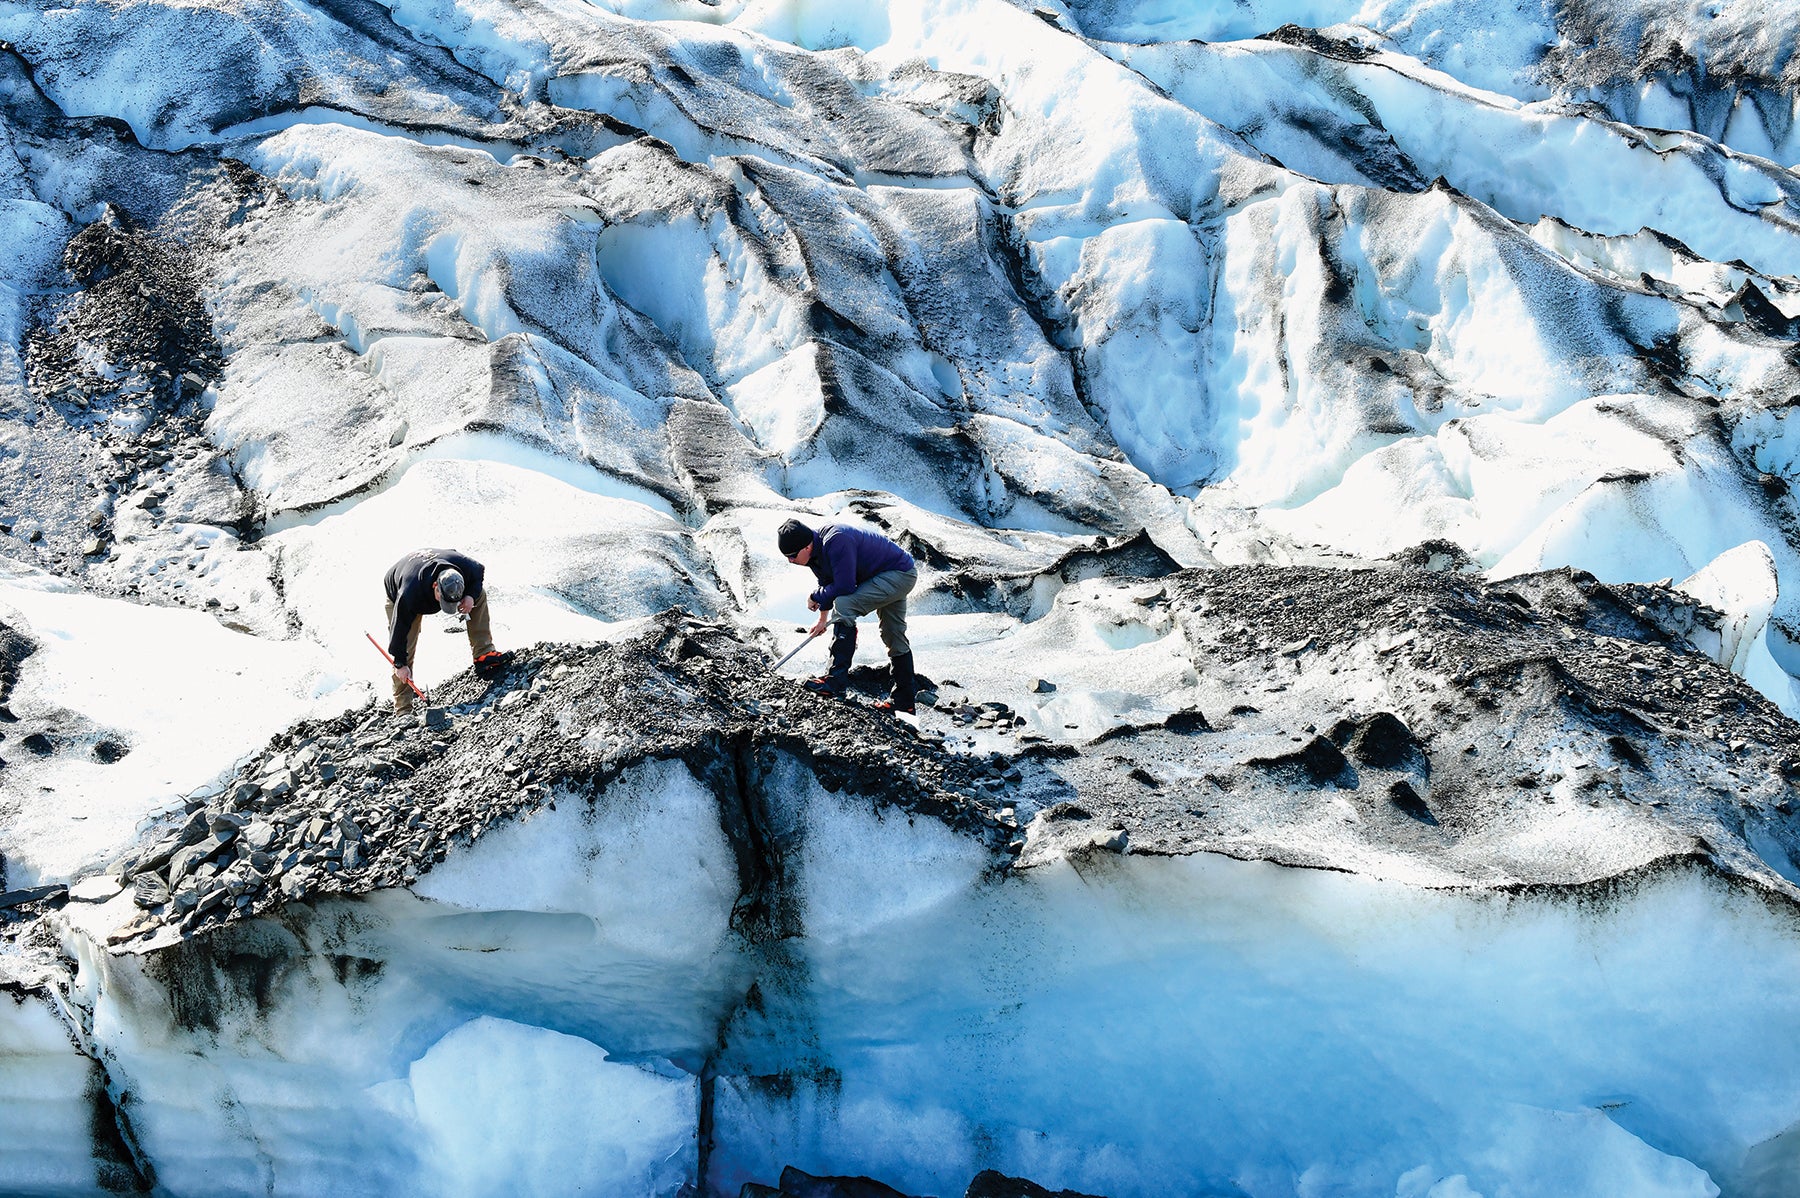 Soldiers from the 2nd Infantry Brigade Combat Team (Airborne), 11th Airborne Division, dig through rocks and debris during a mission on Colony Glacier, Alaska. (Credit: U.S. Army/John Pennell)